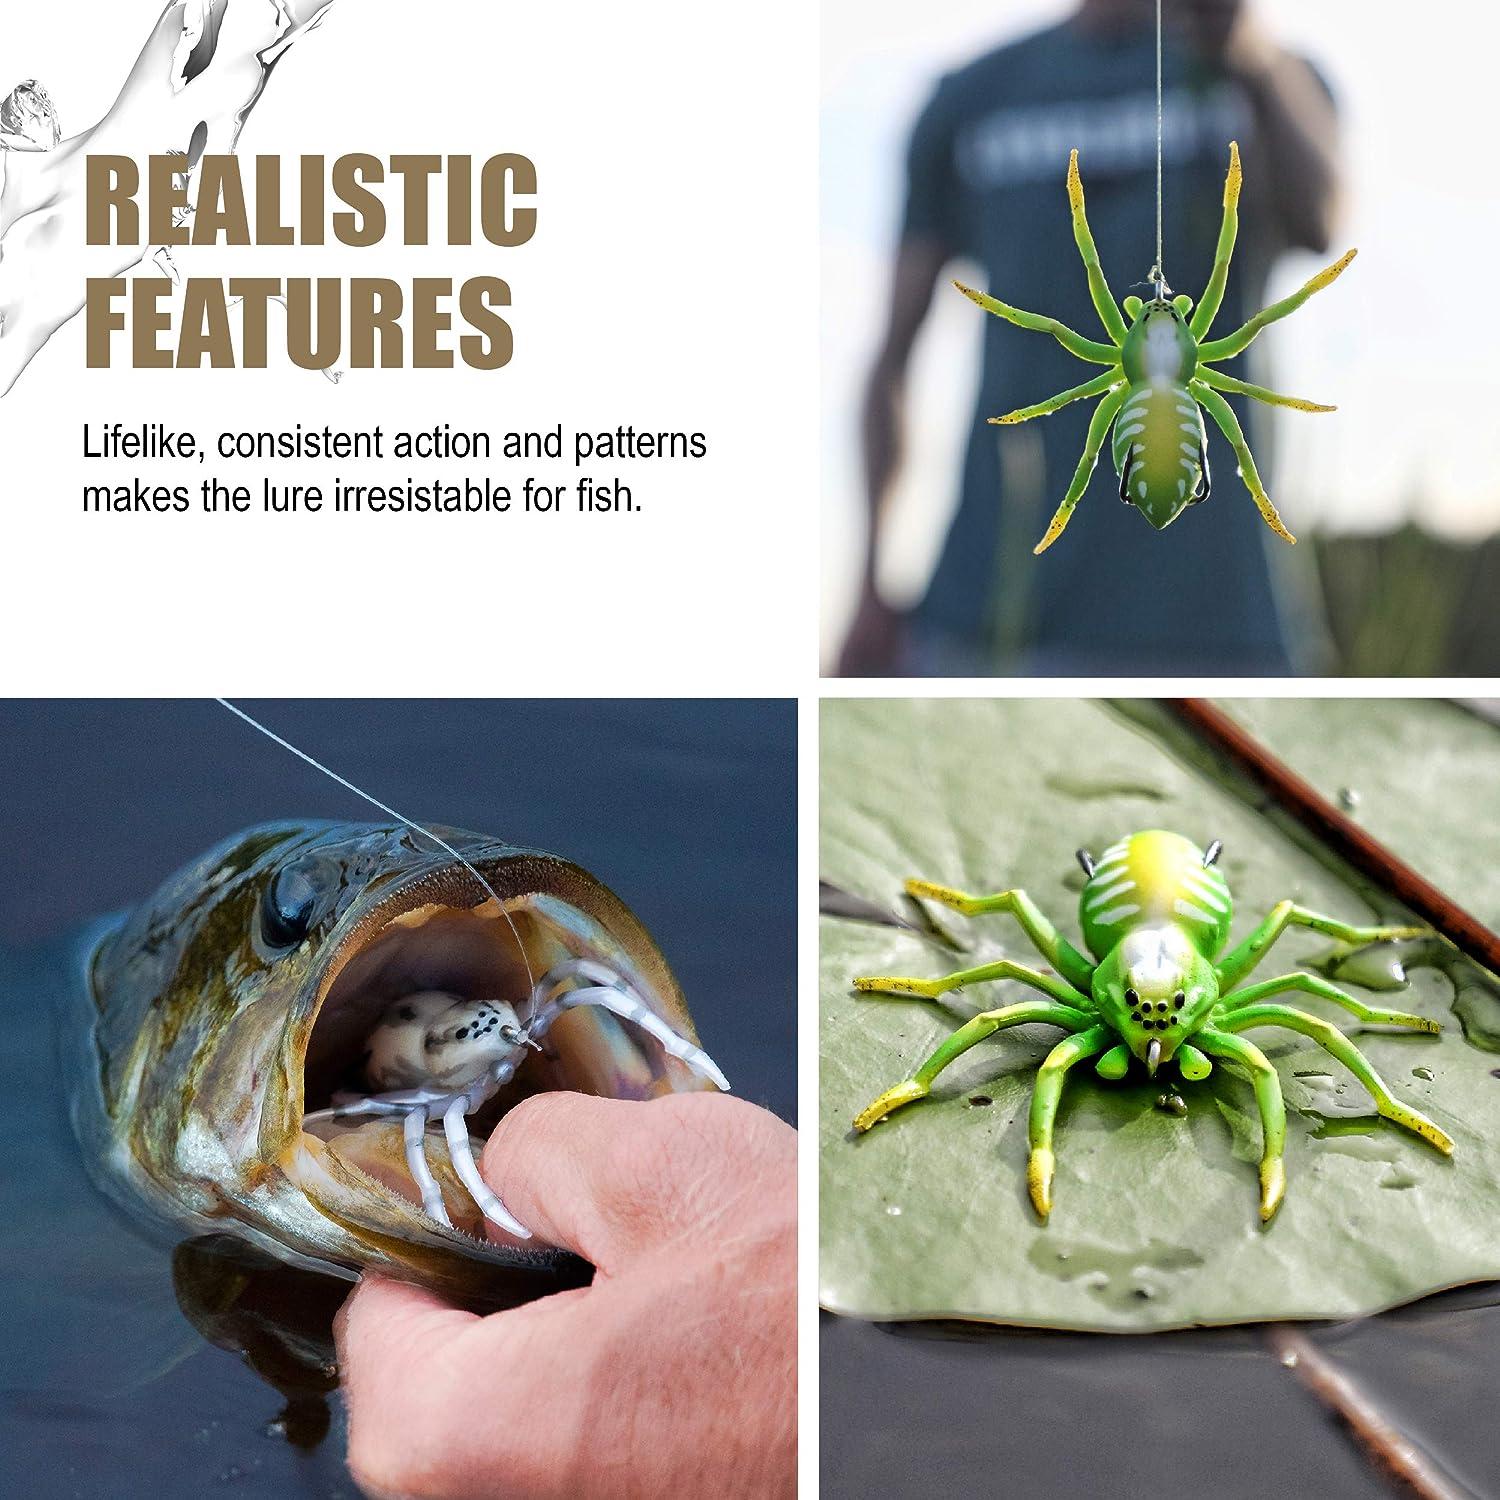 Lunkerhunt Phantom Spider Fishing Lure, Most Realistic Topwater Fishing  Bait with Self-Righting Ballast for Natural Walking Action